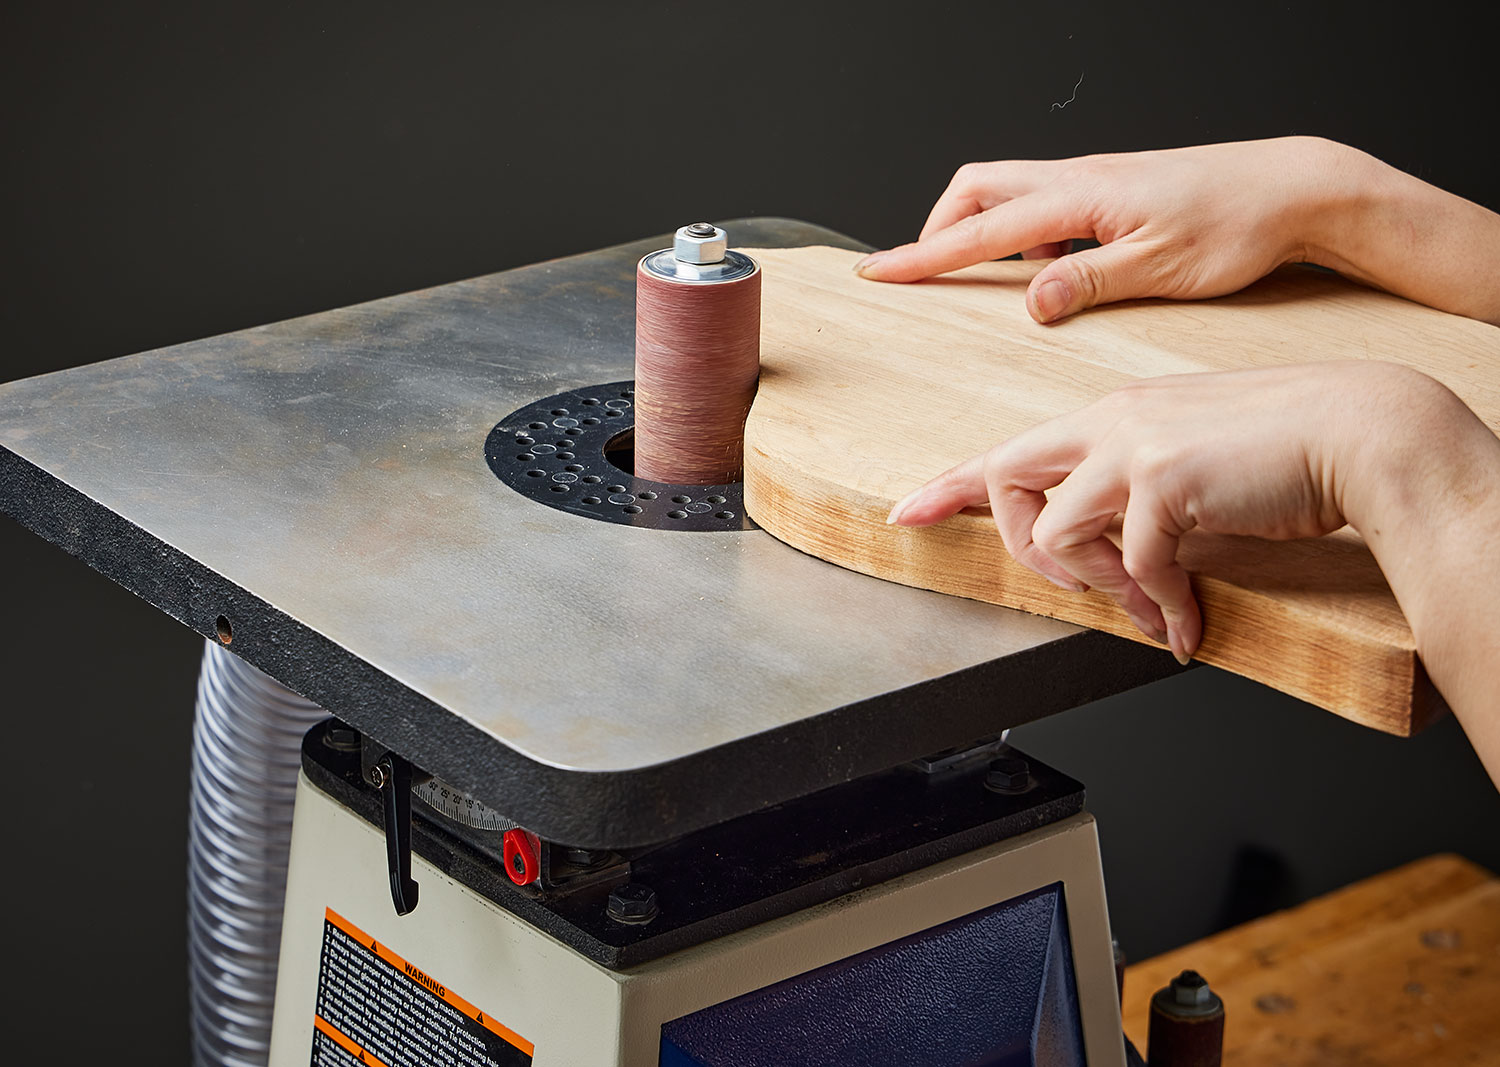 A woodworker uses a Rikon spindle sander to smooth the edge of a wooden workpiece.